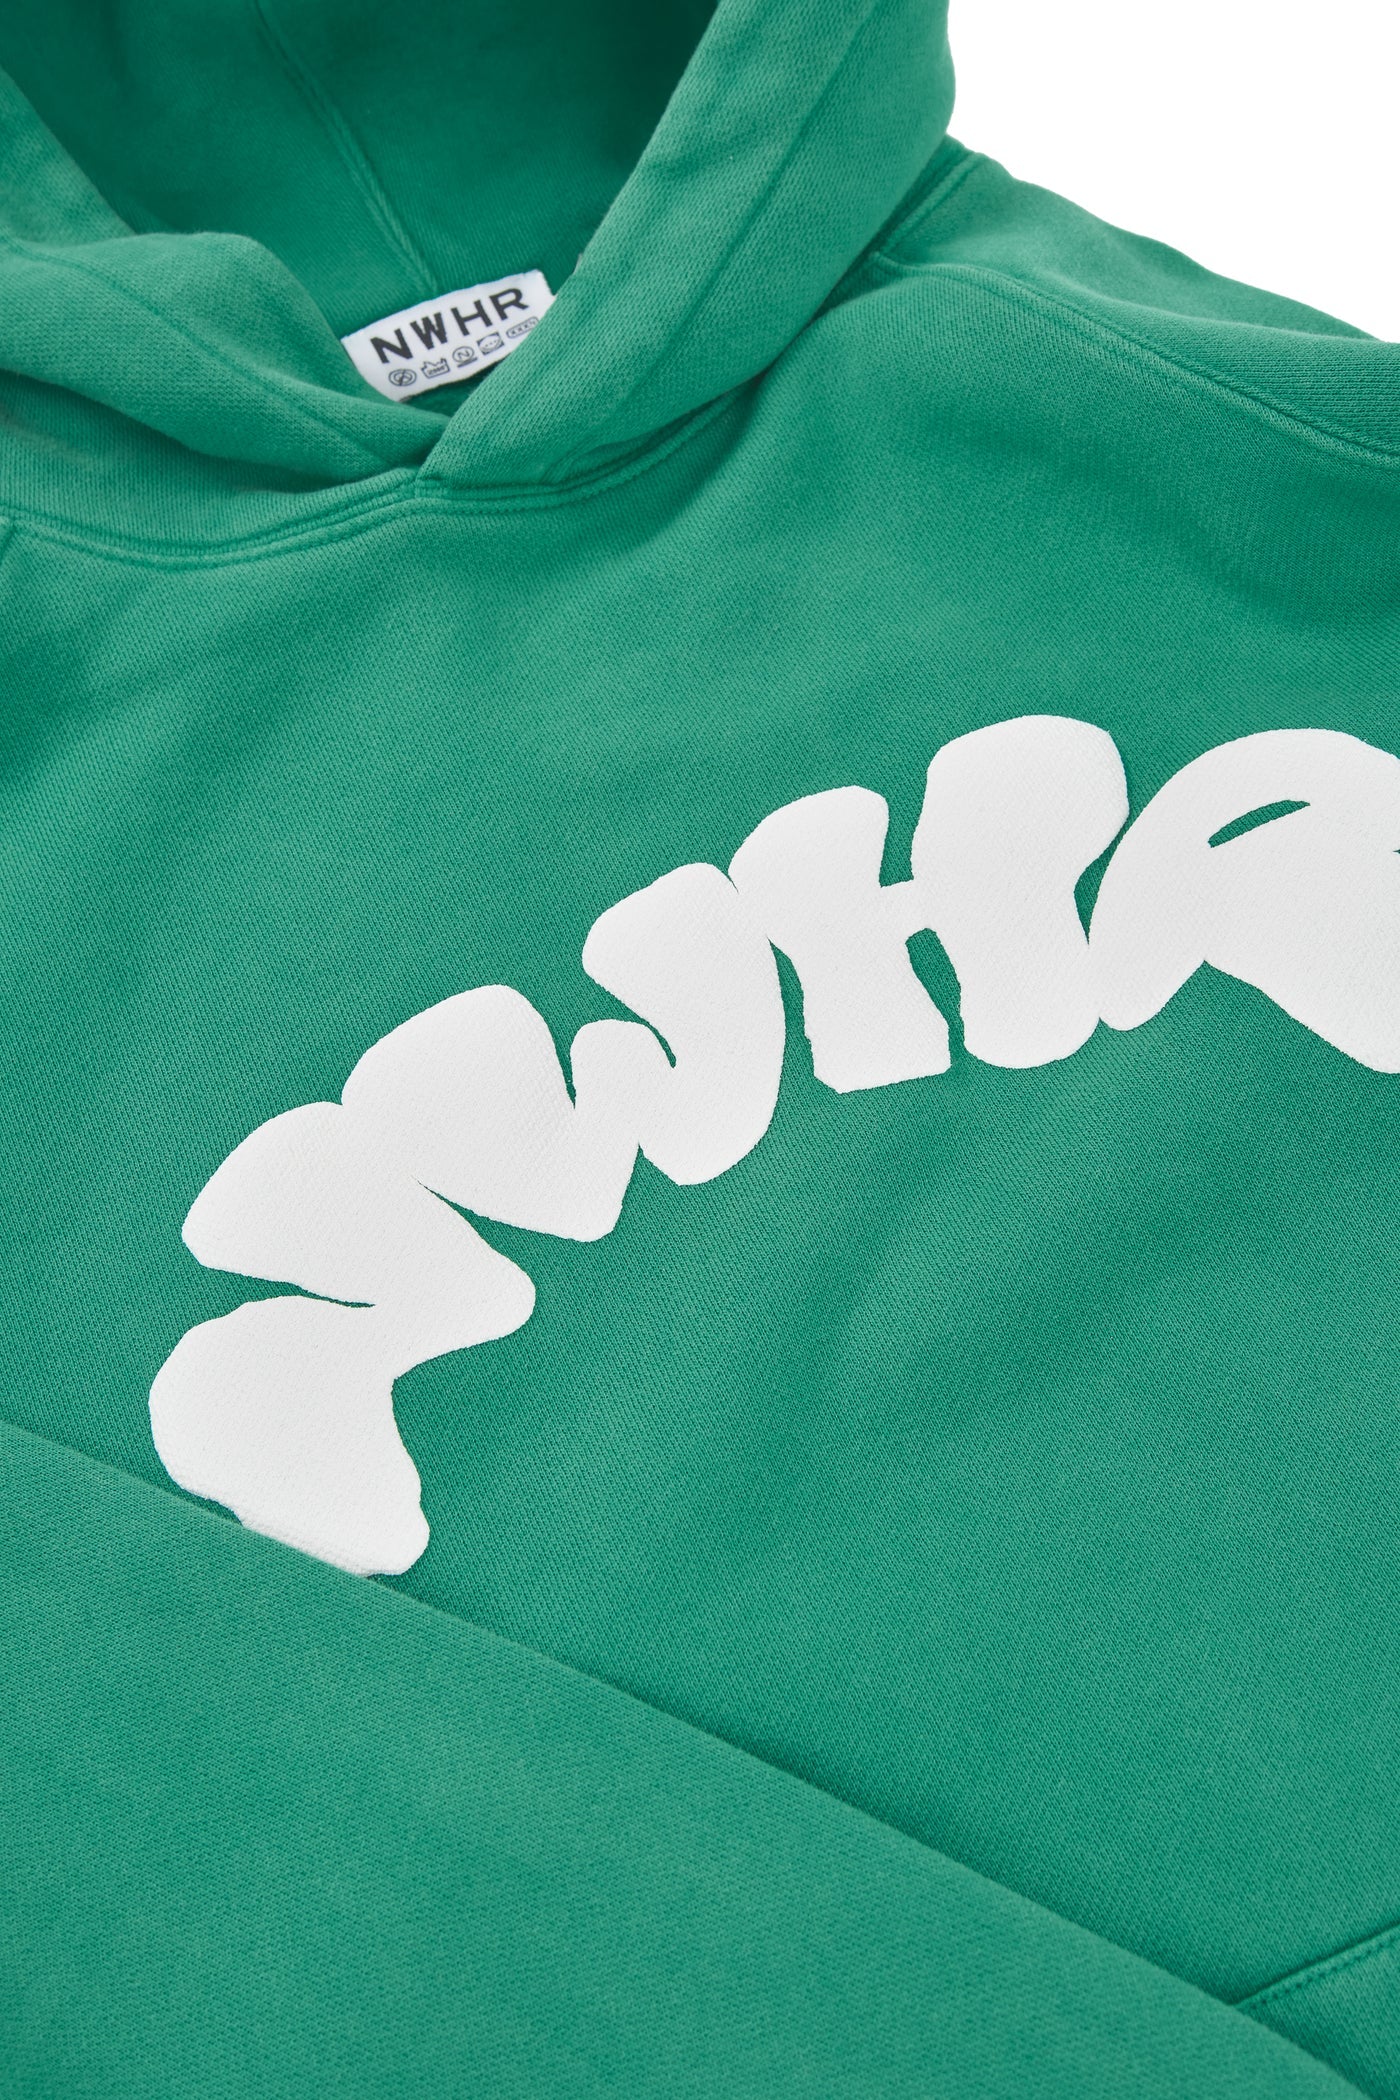 NWHR Hoodie Bubble Green